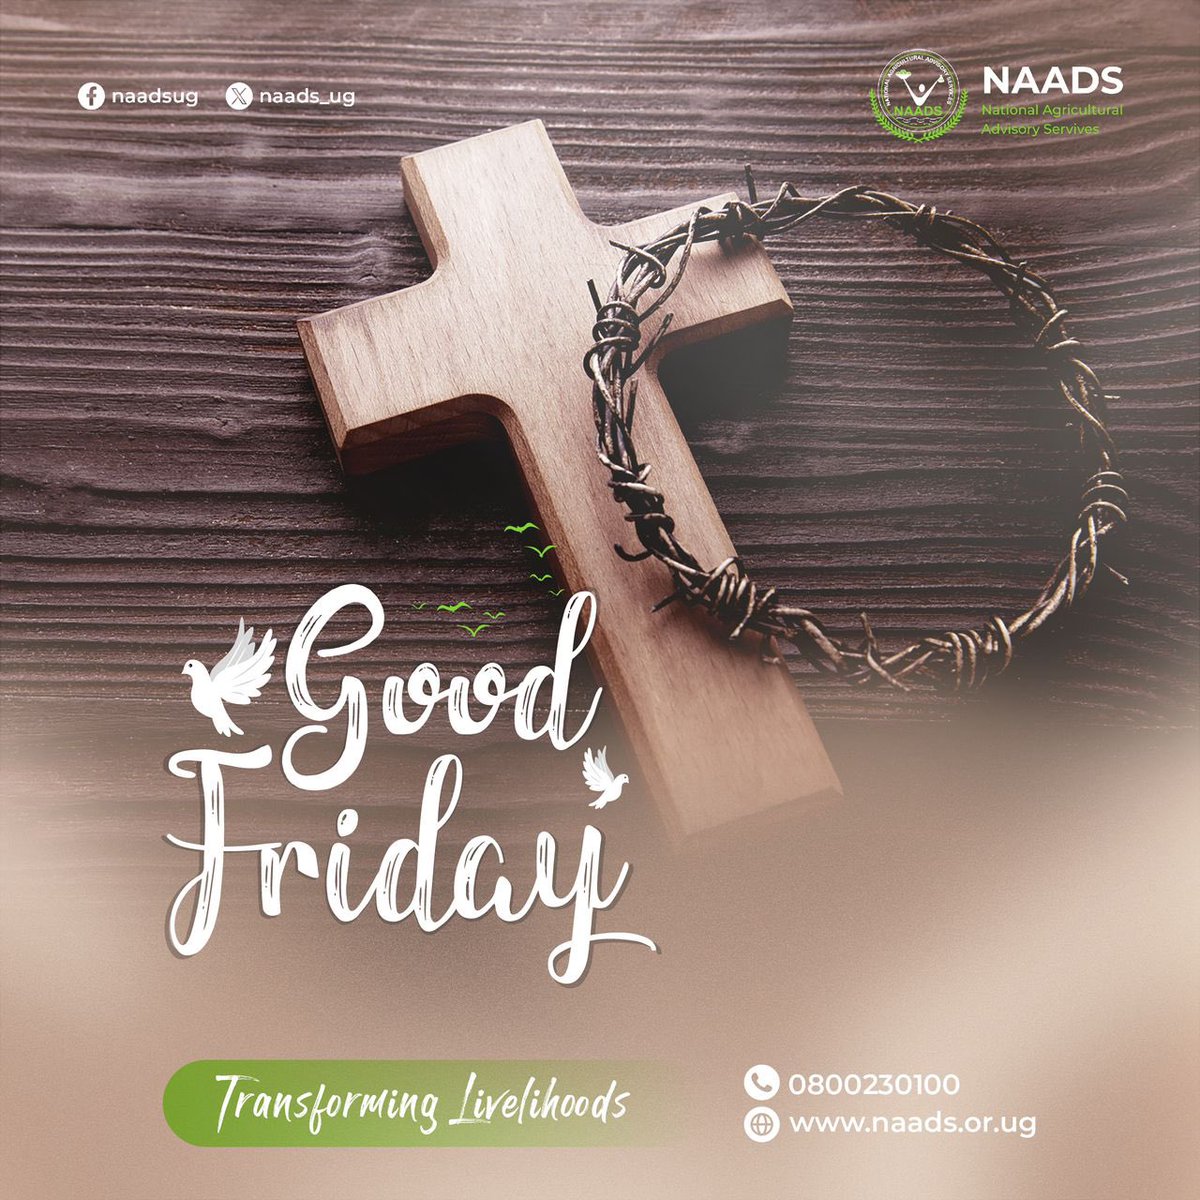 As we commemorate the crucifixion of Jesus Christ, may we remember his teachings of compassion and mercy. Have a blessed Good Friday! #GoodFriday2024 #NAADSTransforminglivelihoods